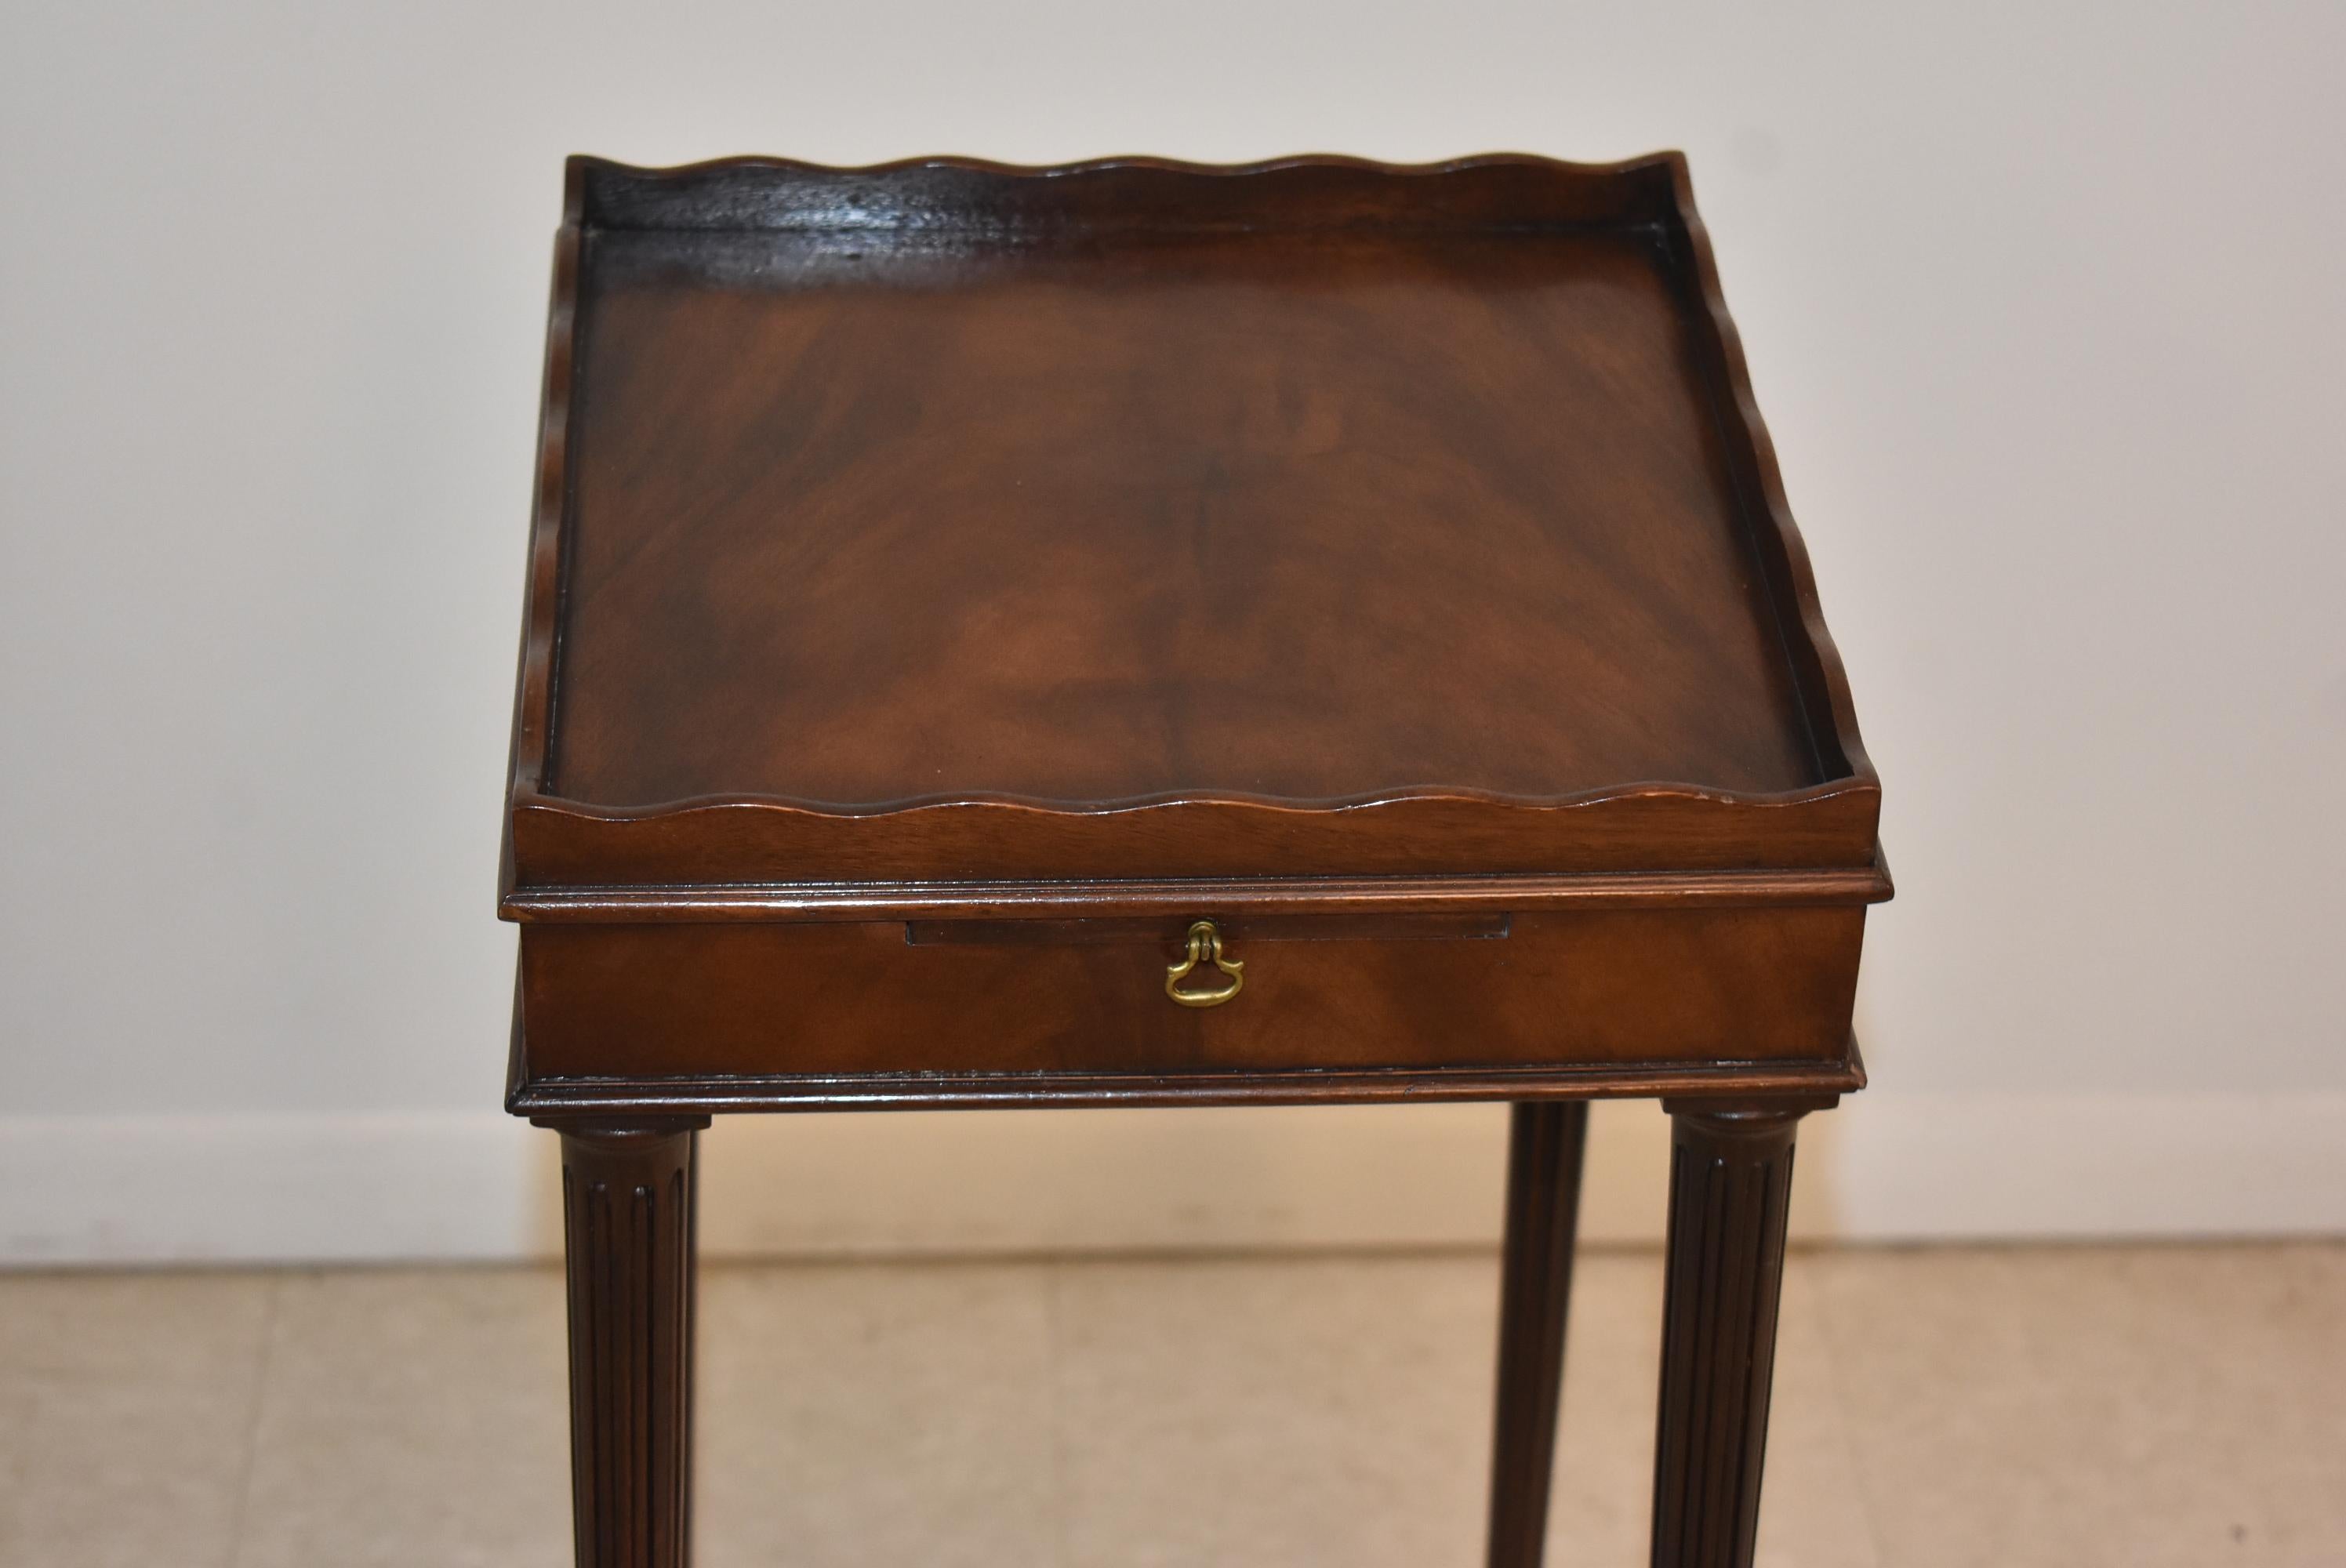 Small Sheraton style chair side stand with pullout / pull-out shelf by Baker Stately Homes. Flamed mahogany top with brass casters. Measures: 11.5